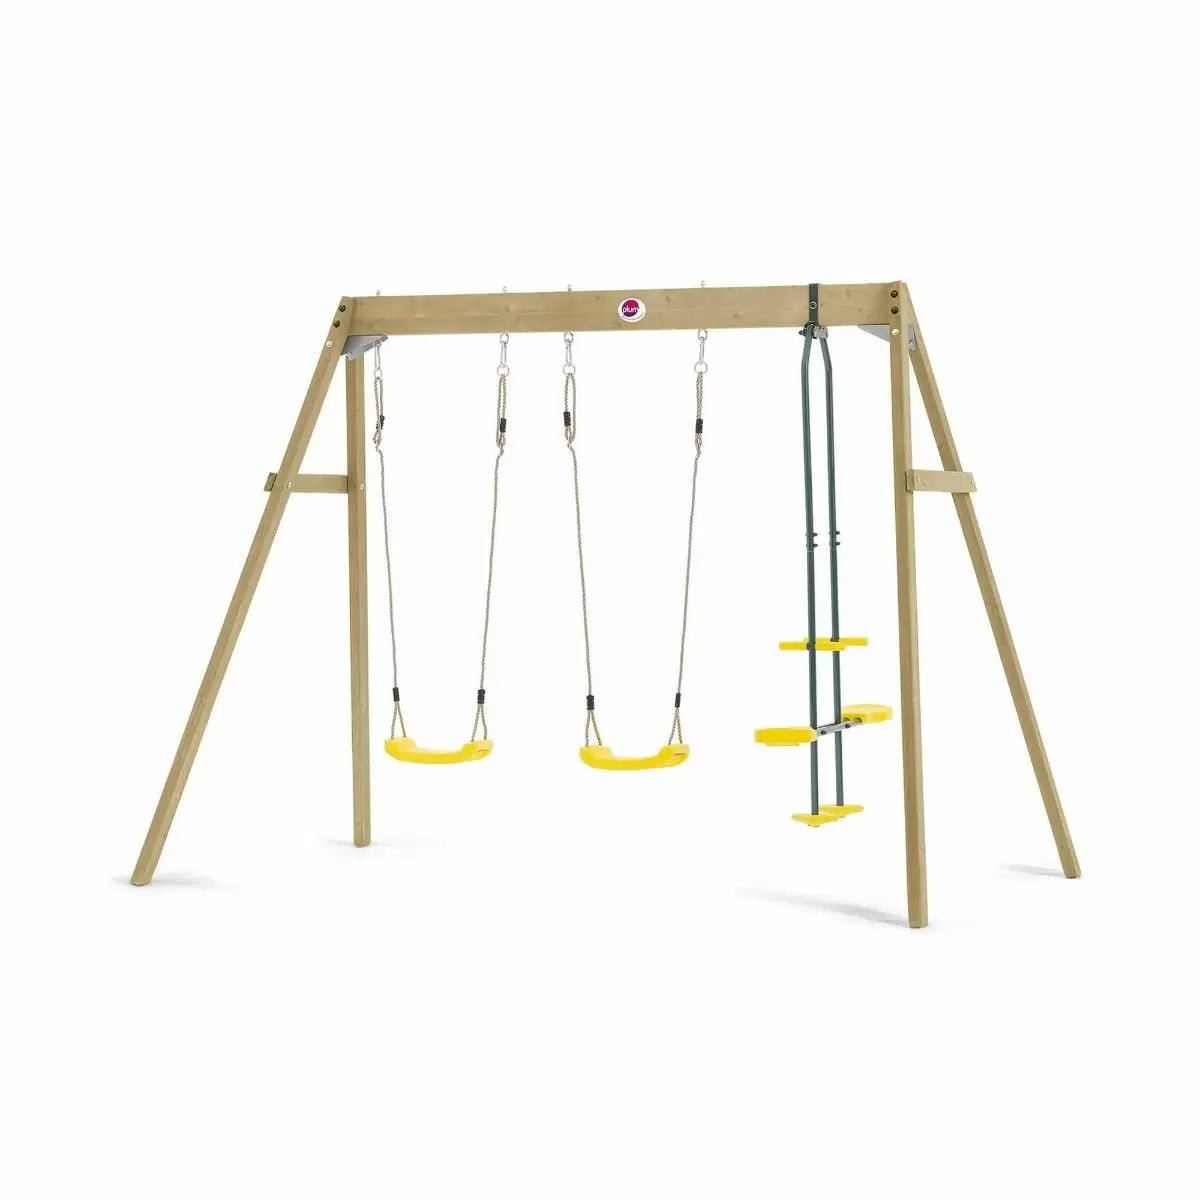 Shop Now - Plum Double Swing Set with Glider